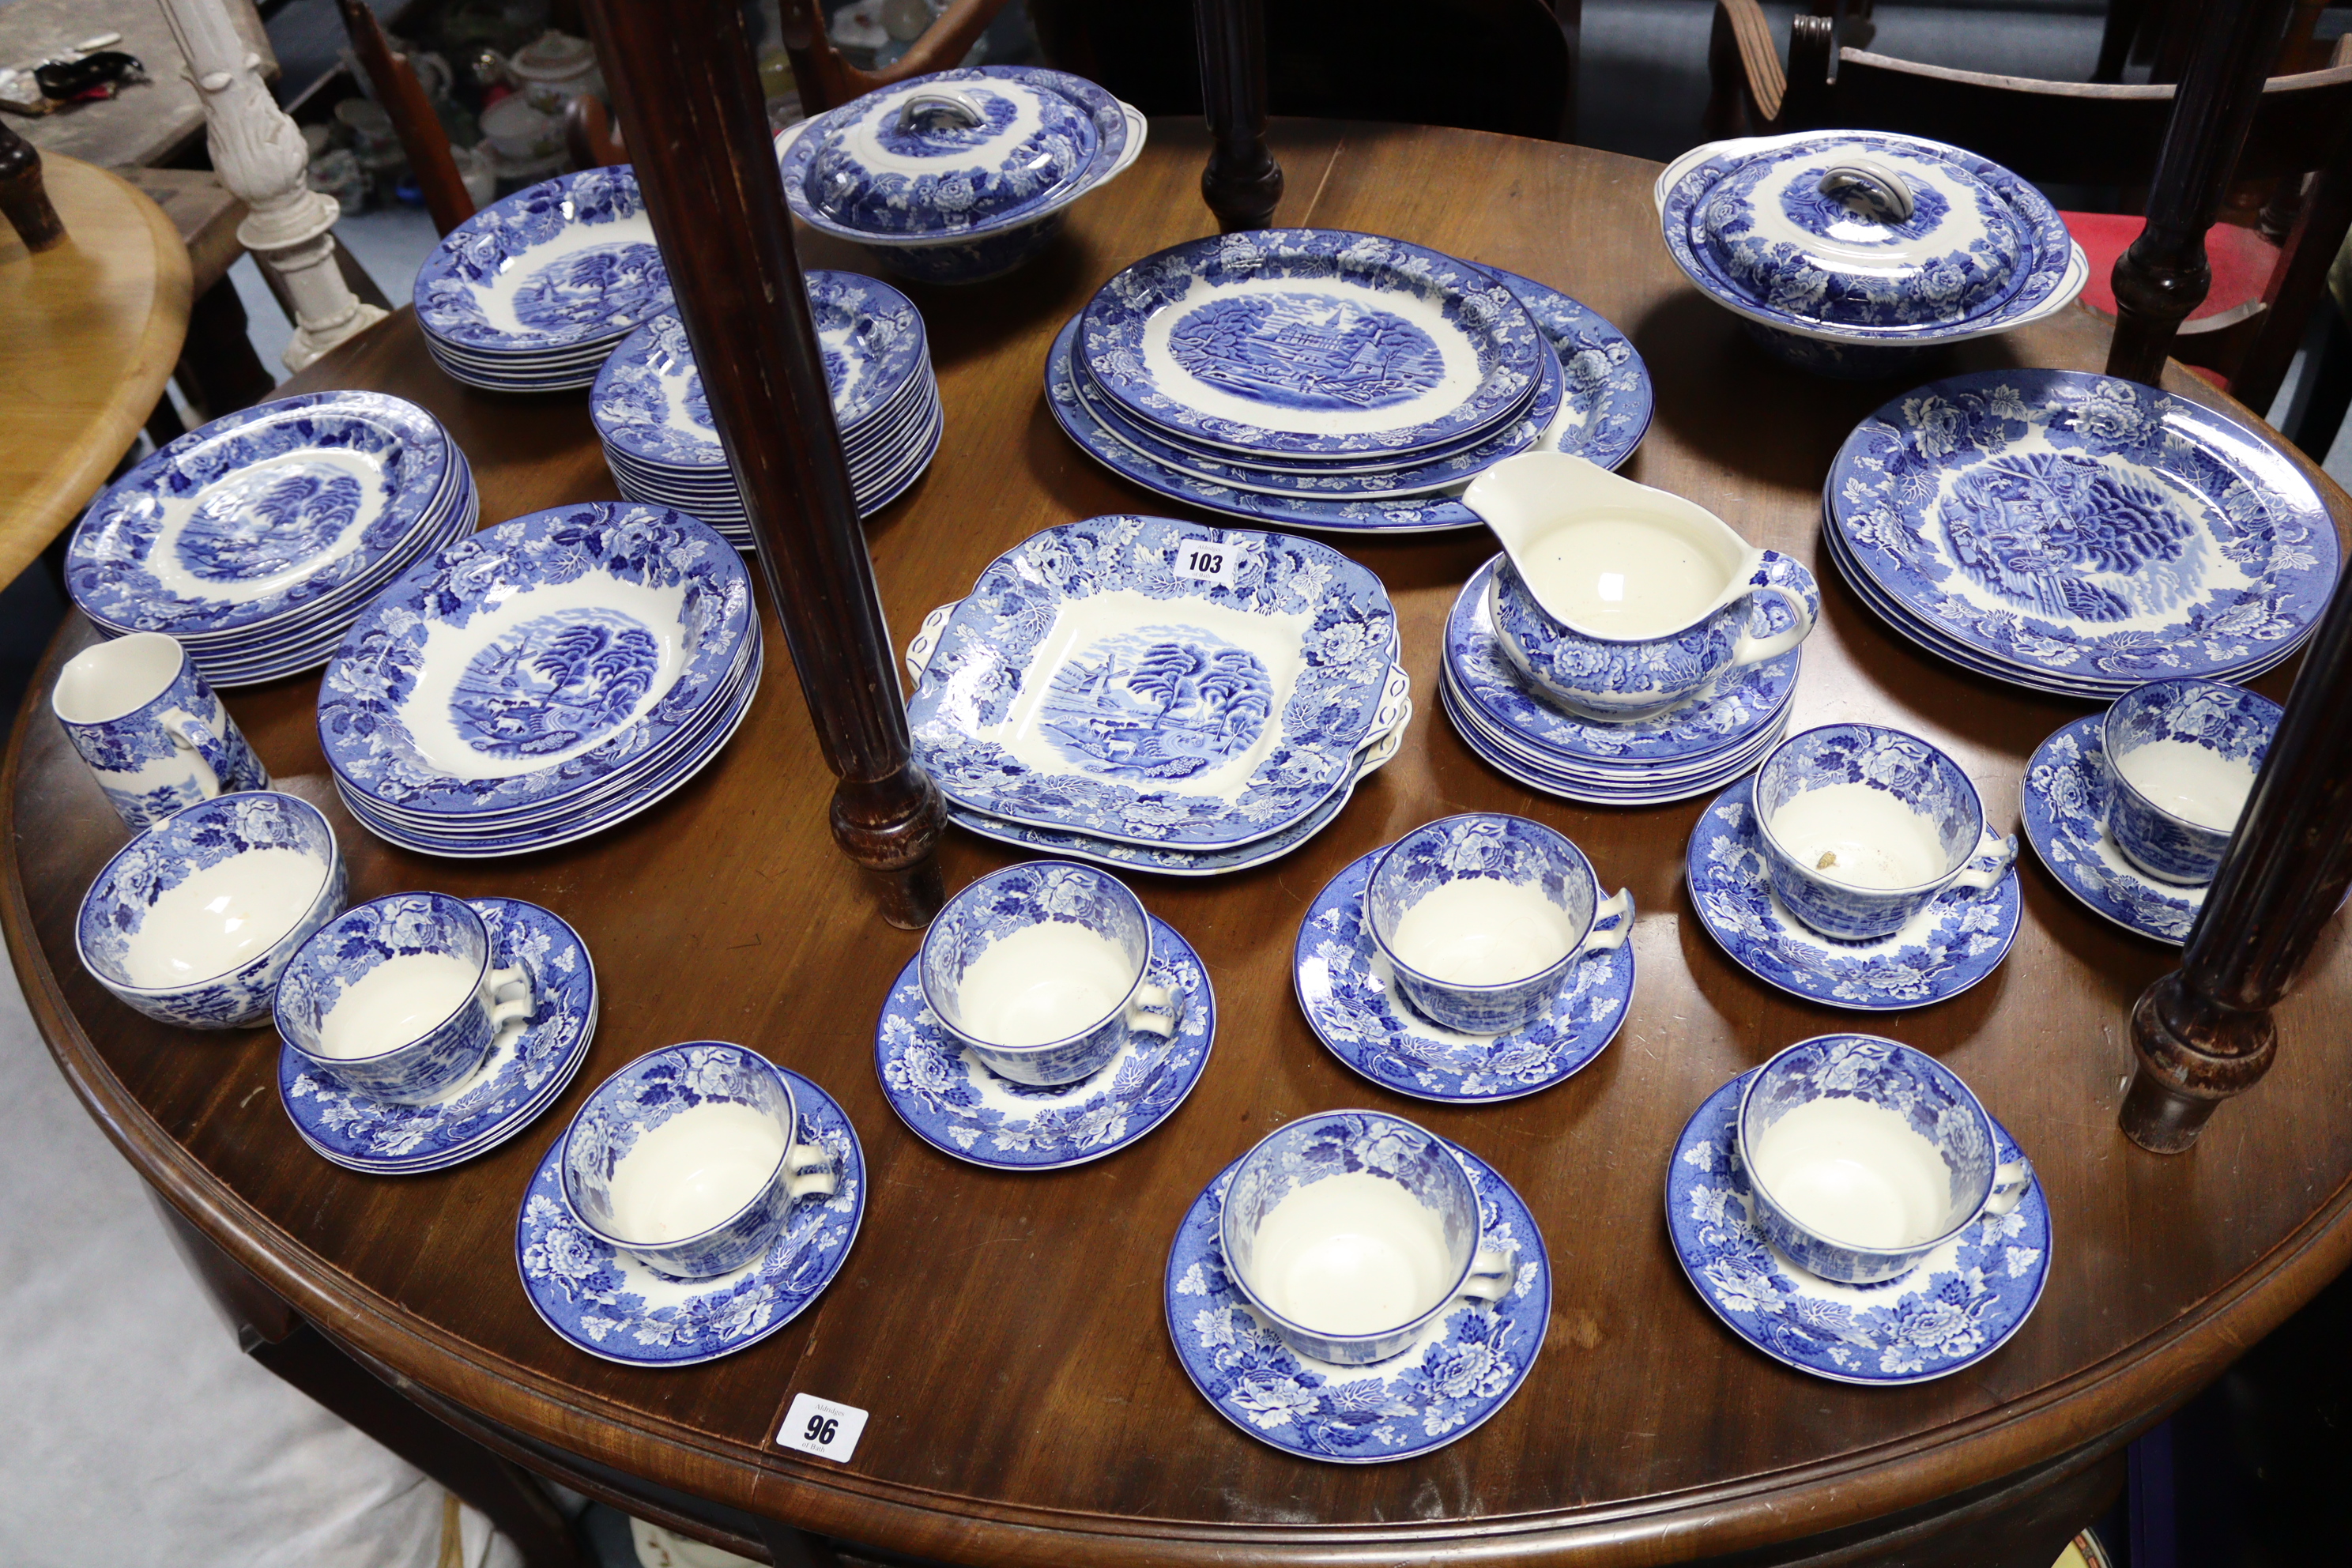 A Woods Ware blue & white “Enoch Woods English Scenery” pattern extensive seventy-piece part